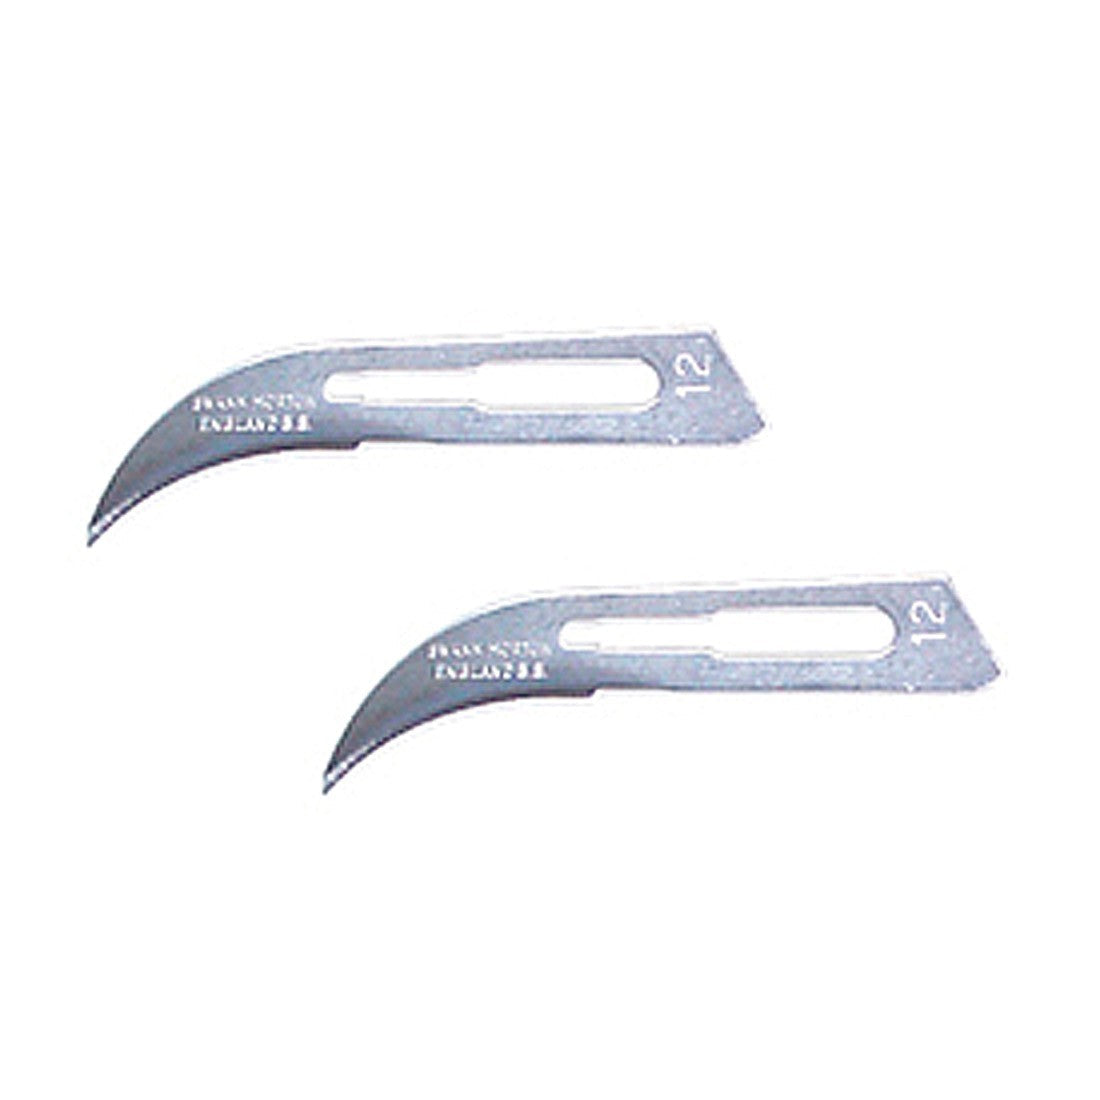 Mold Cutting Knife and Blades